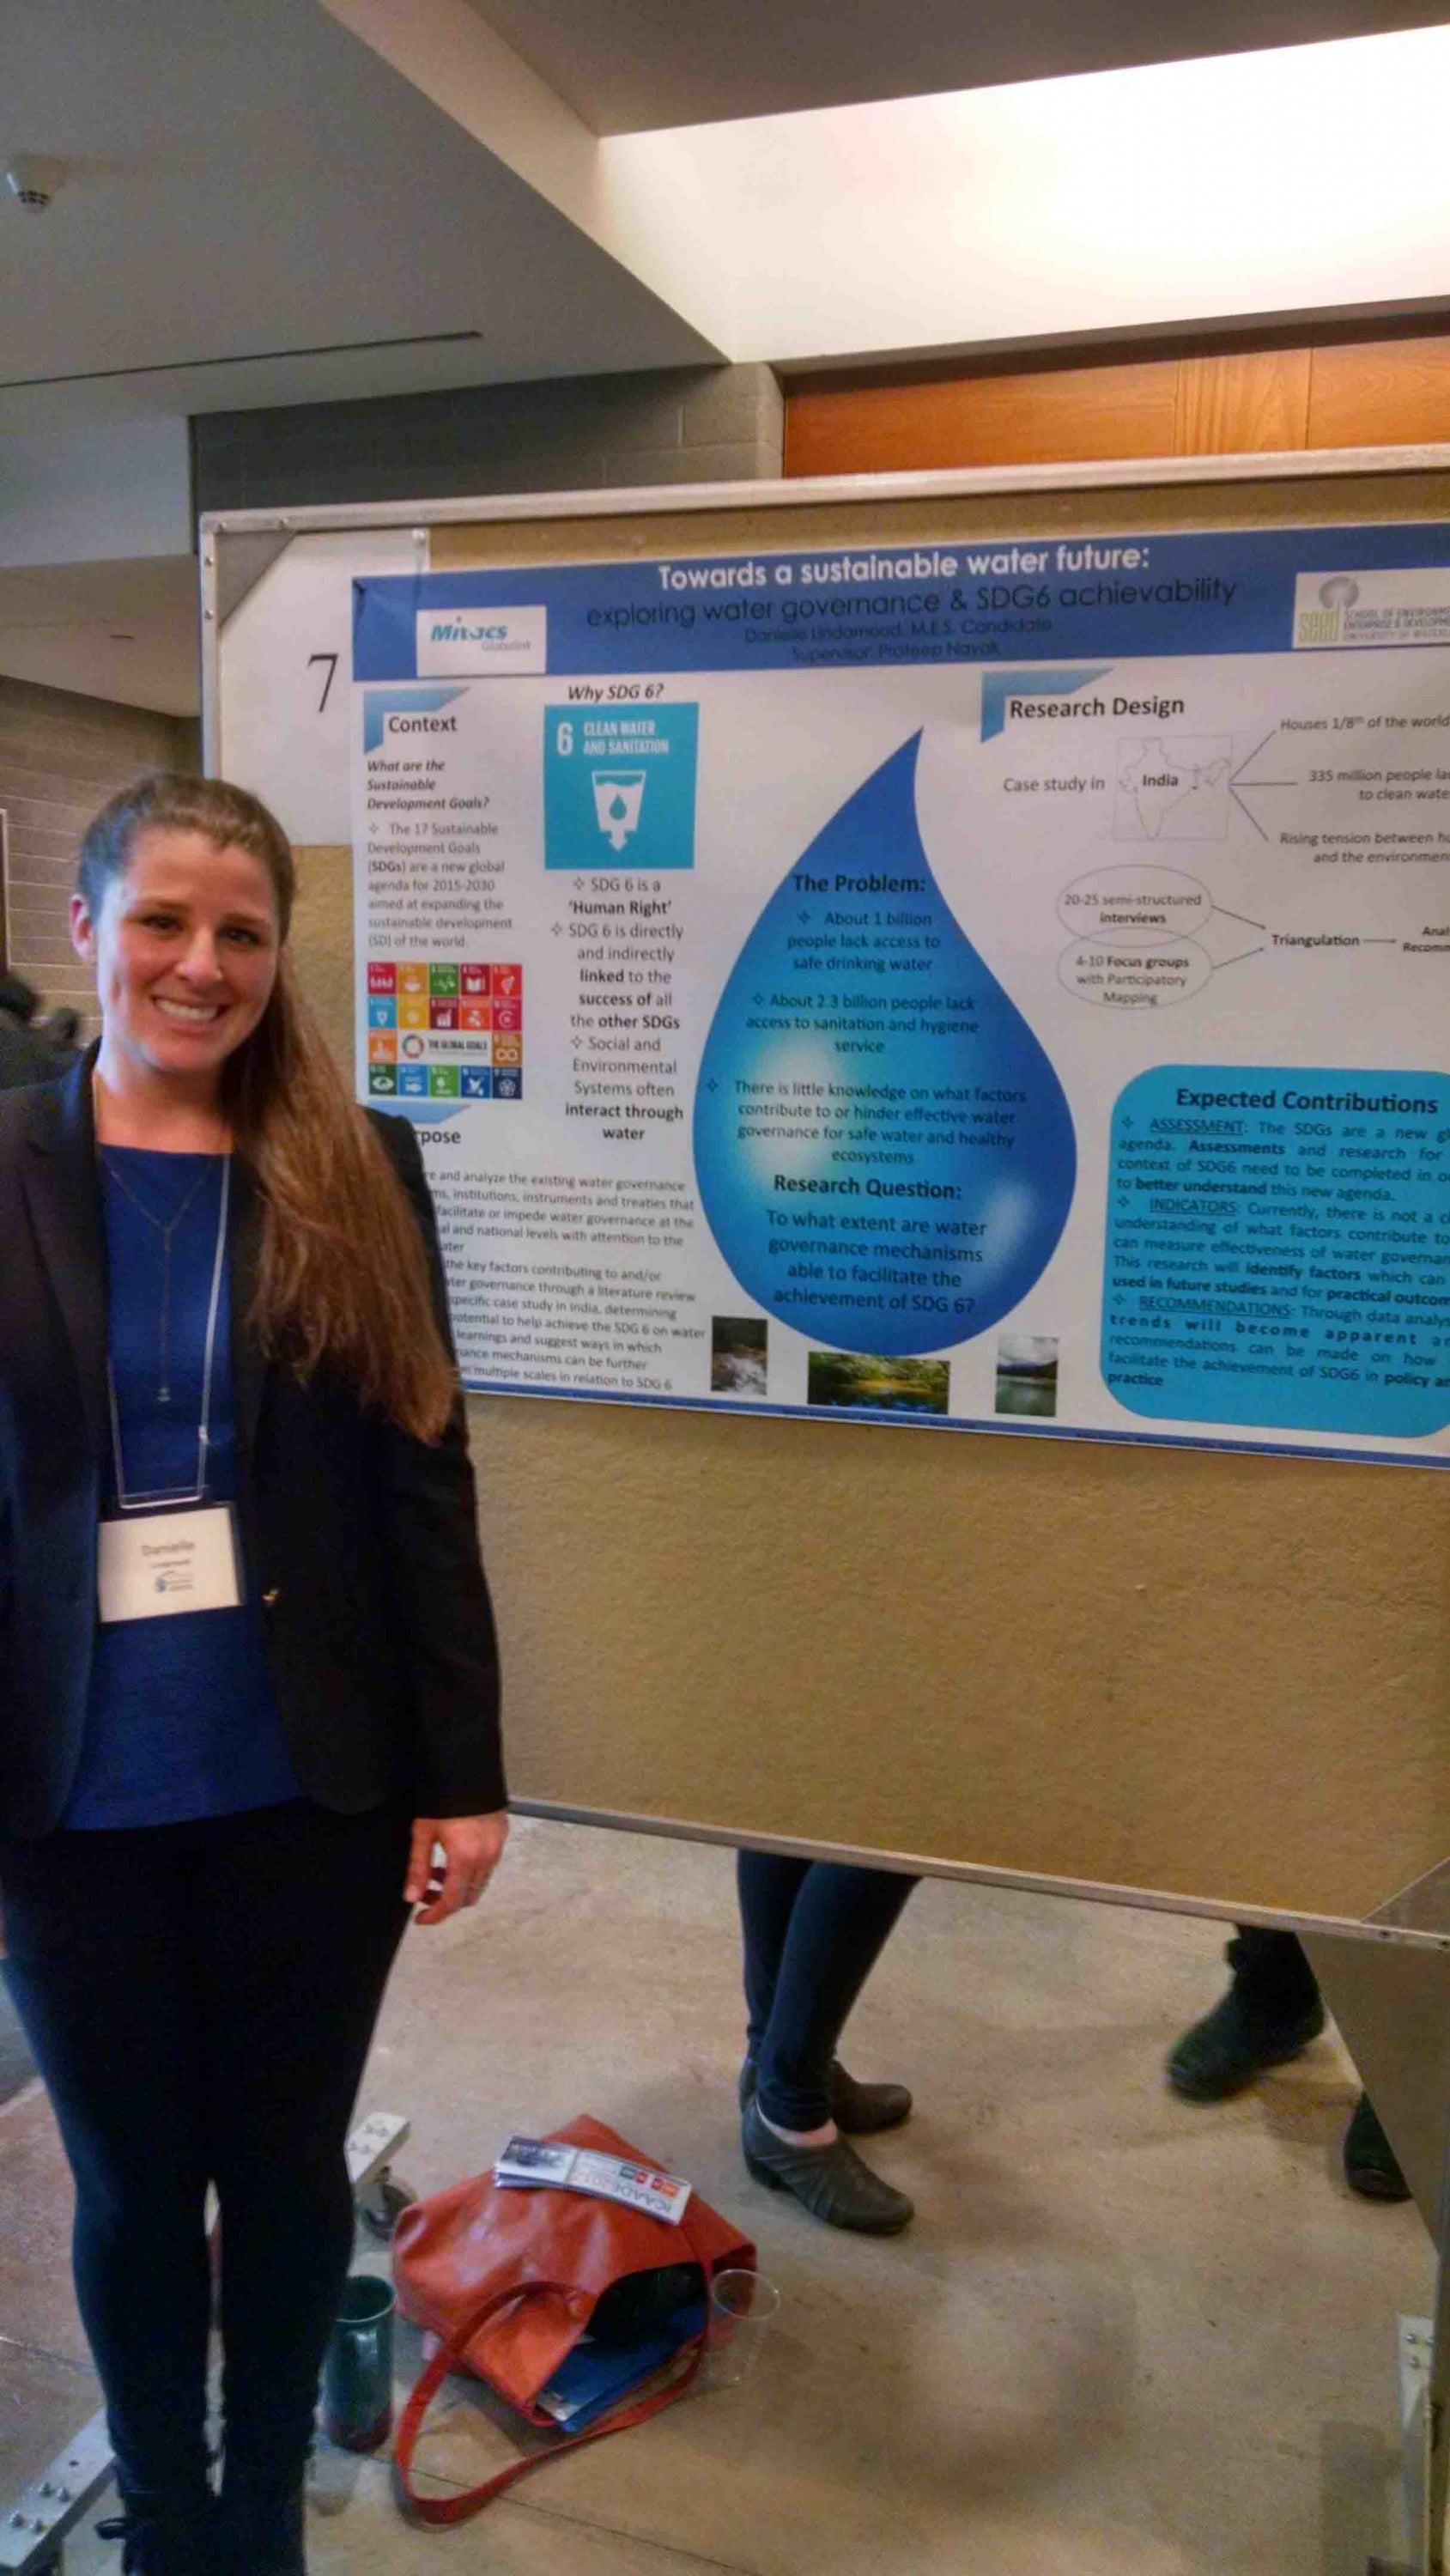 Danielle at a conference presenting her poster